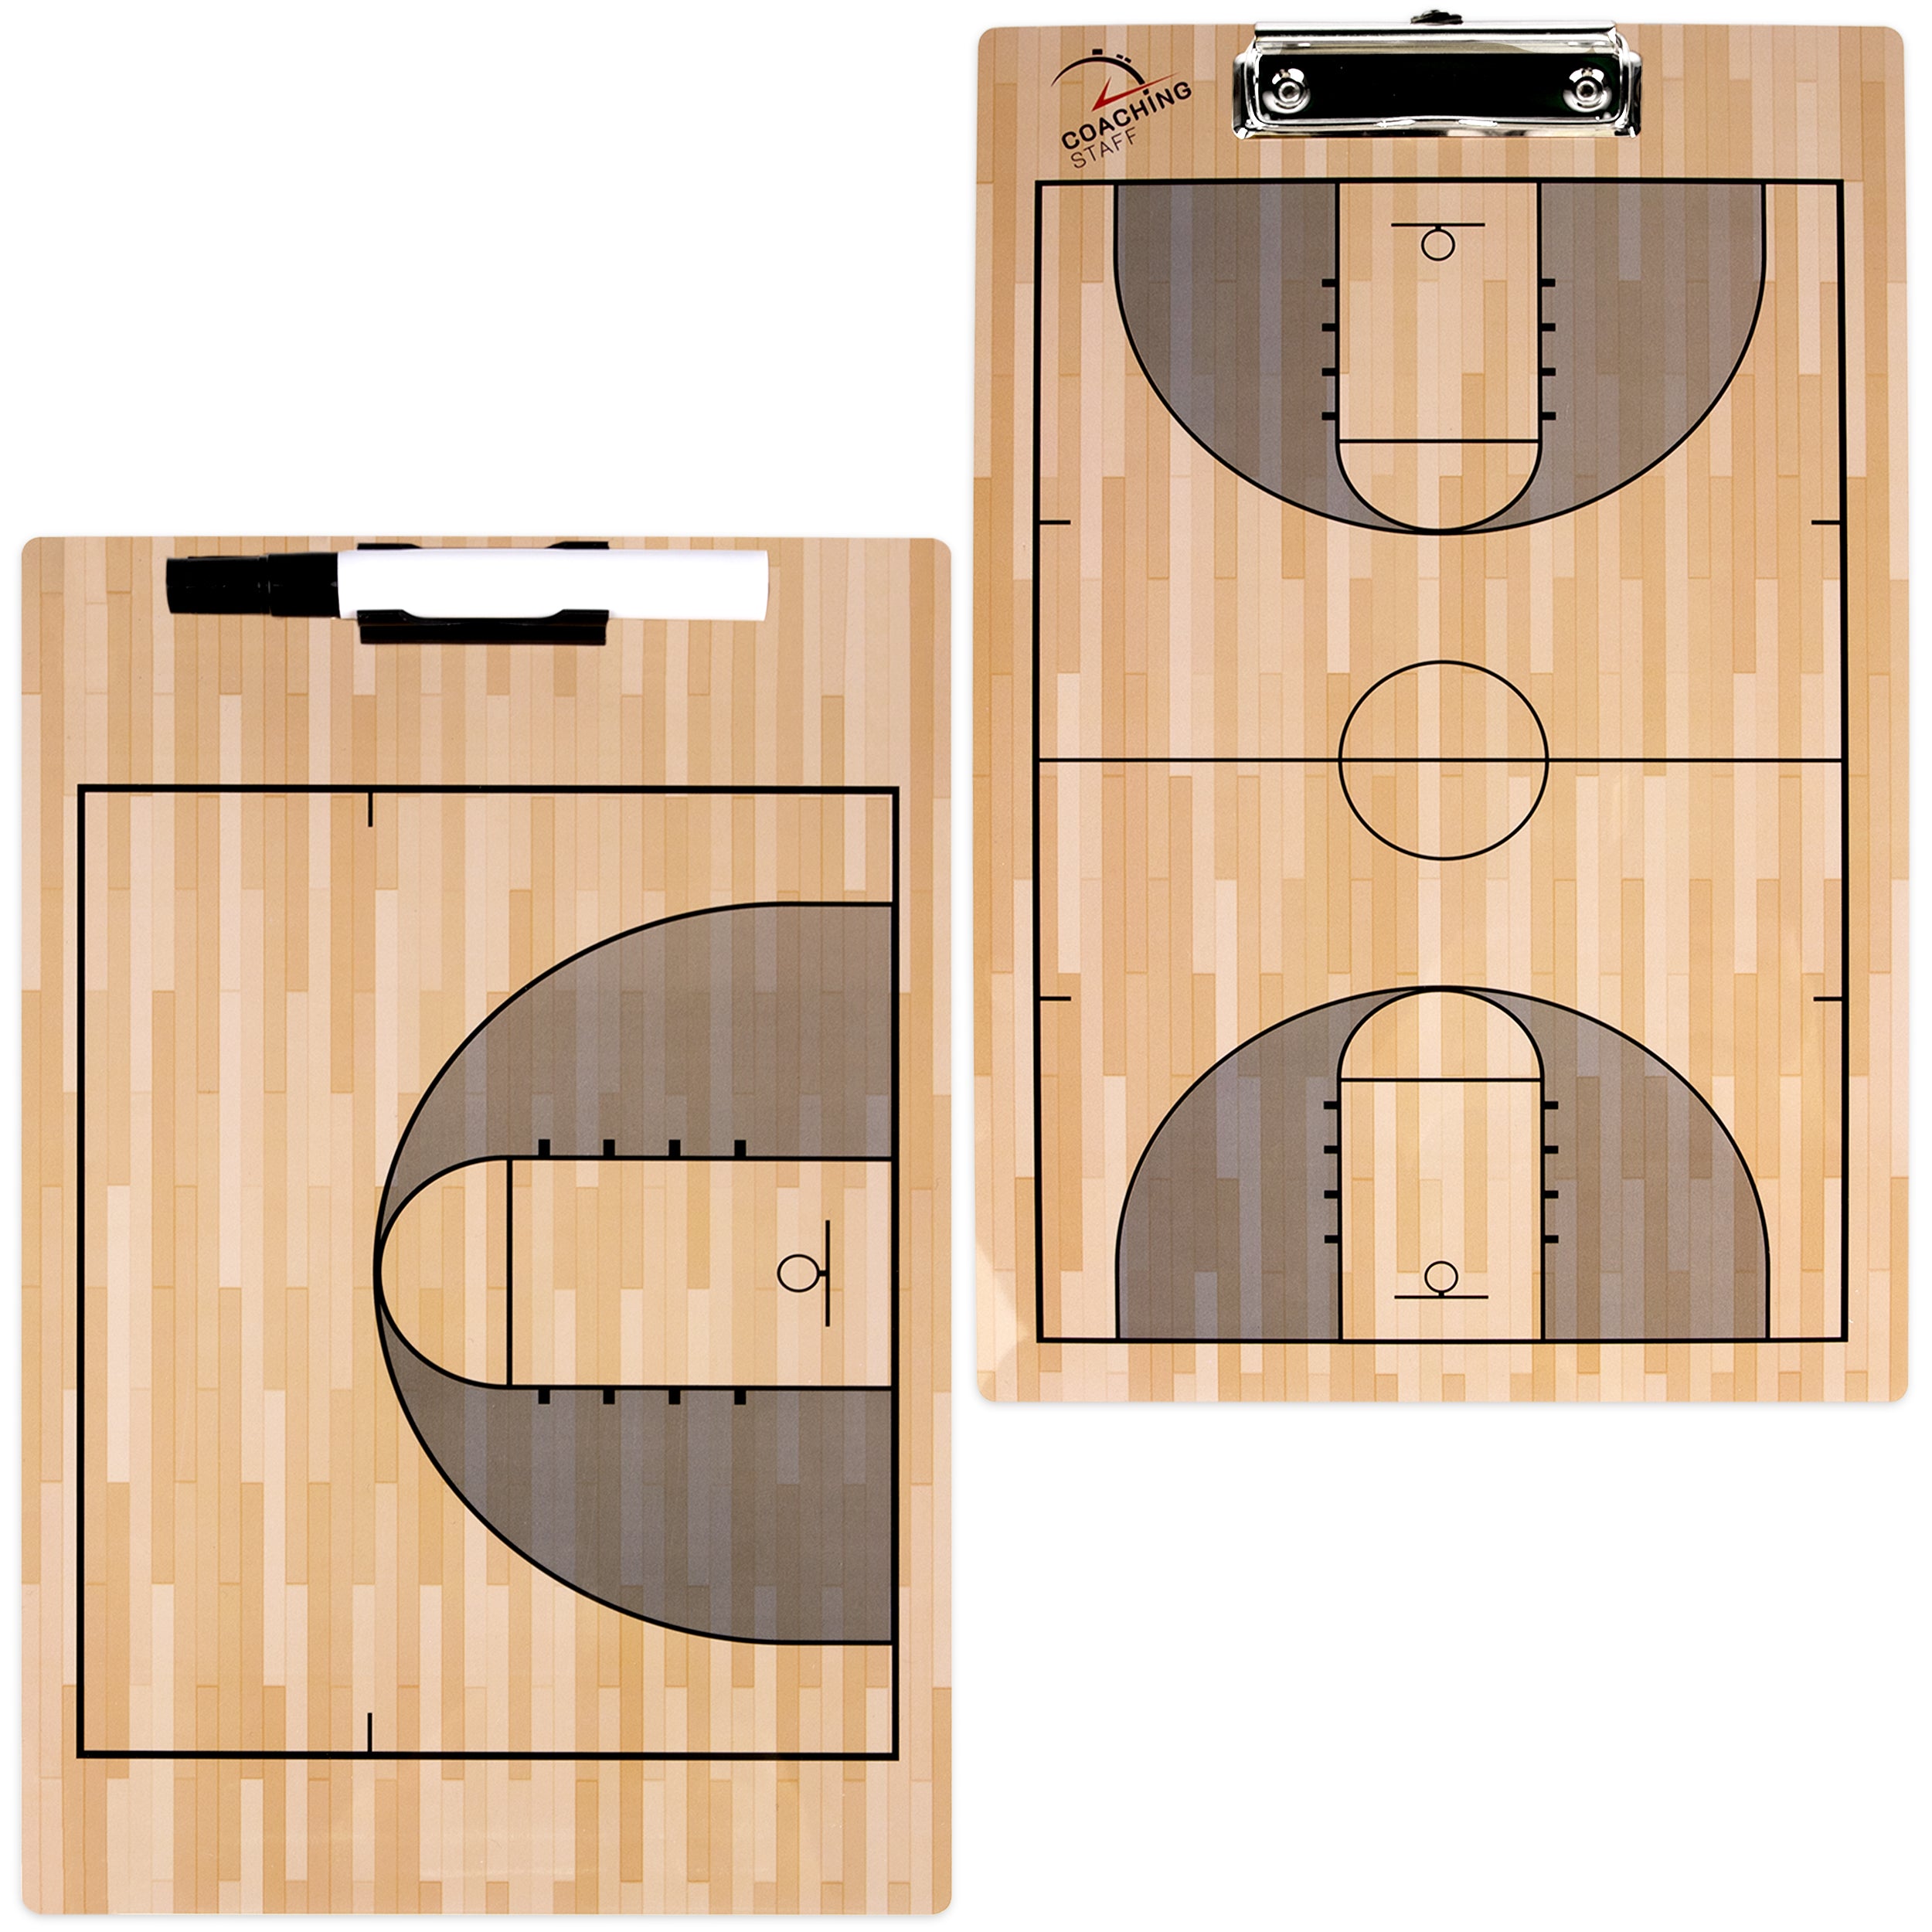 CoachingStaff Ultra-Thick Pro Basketball Coaching Clipboard w/Marker and Dual Clips - 0